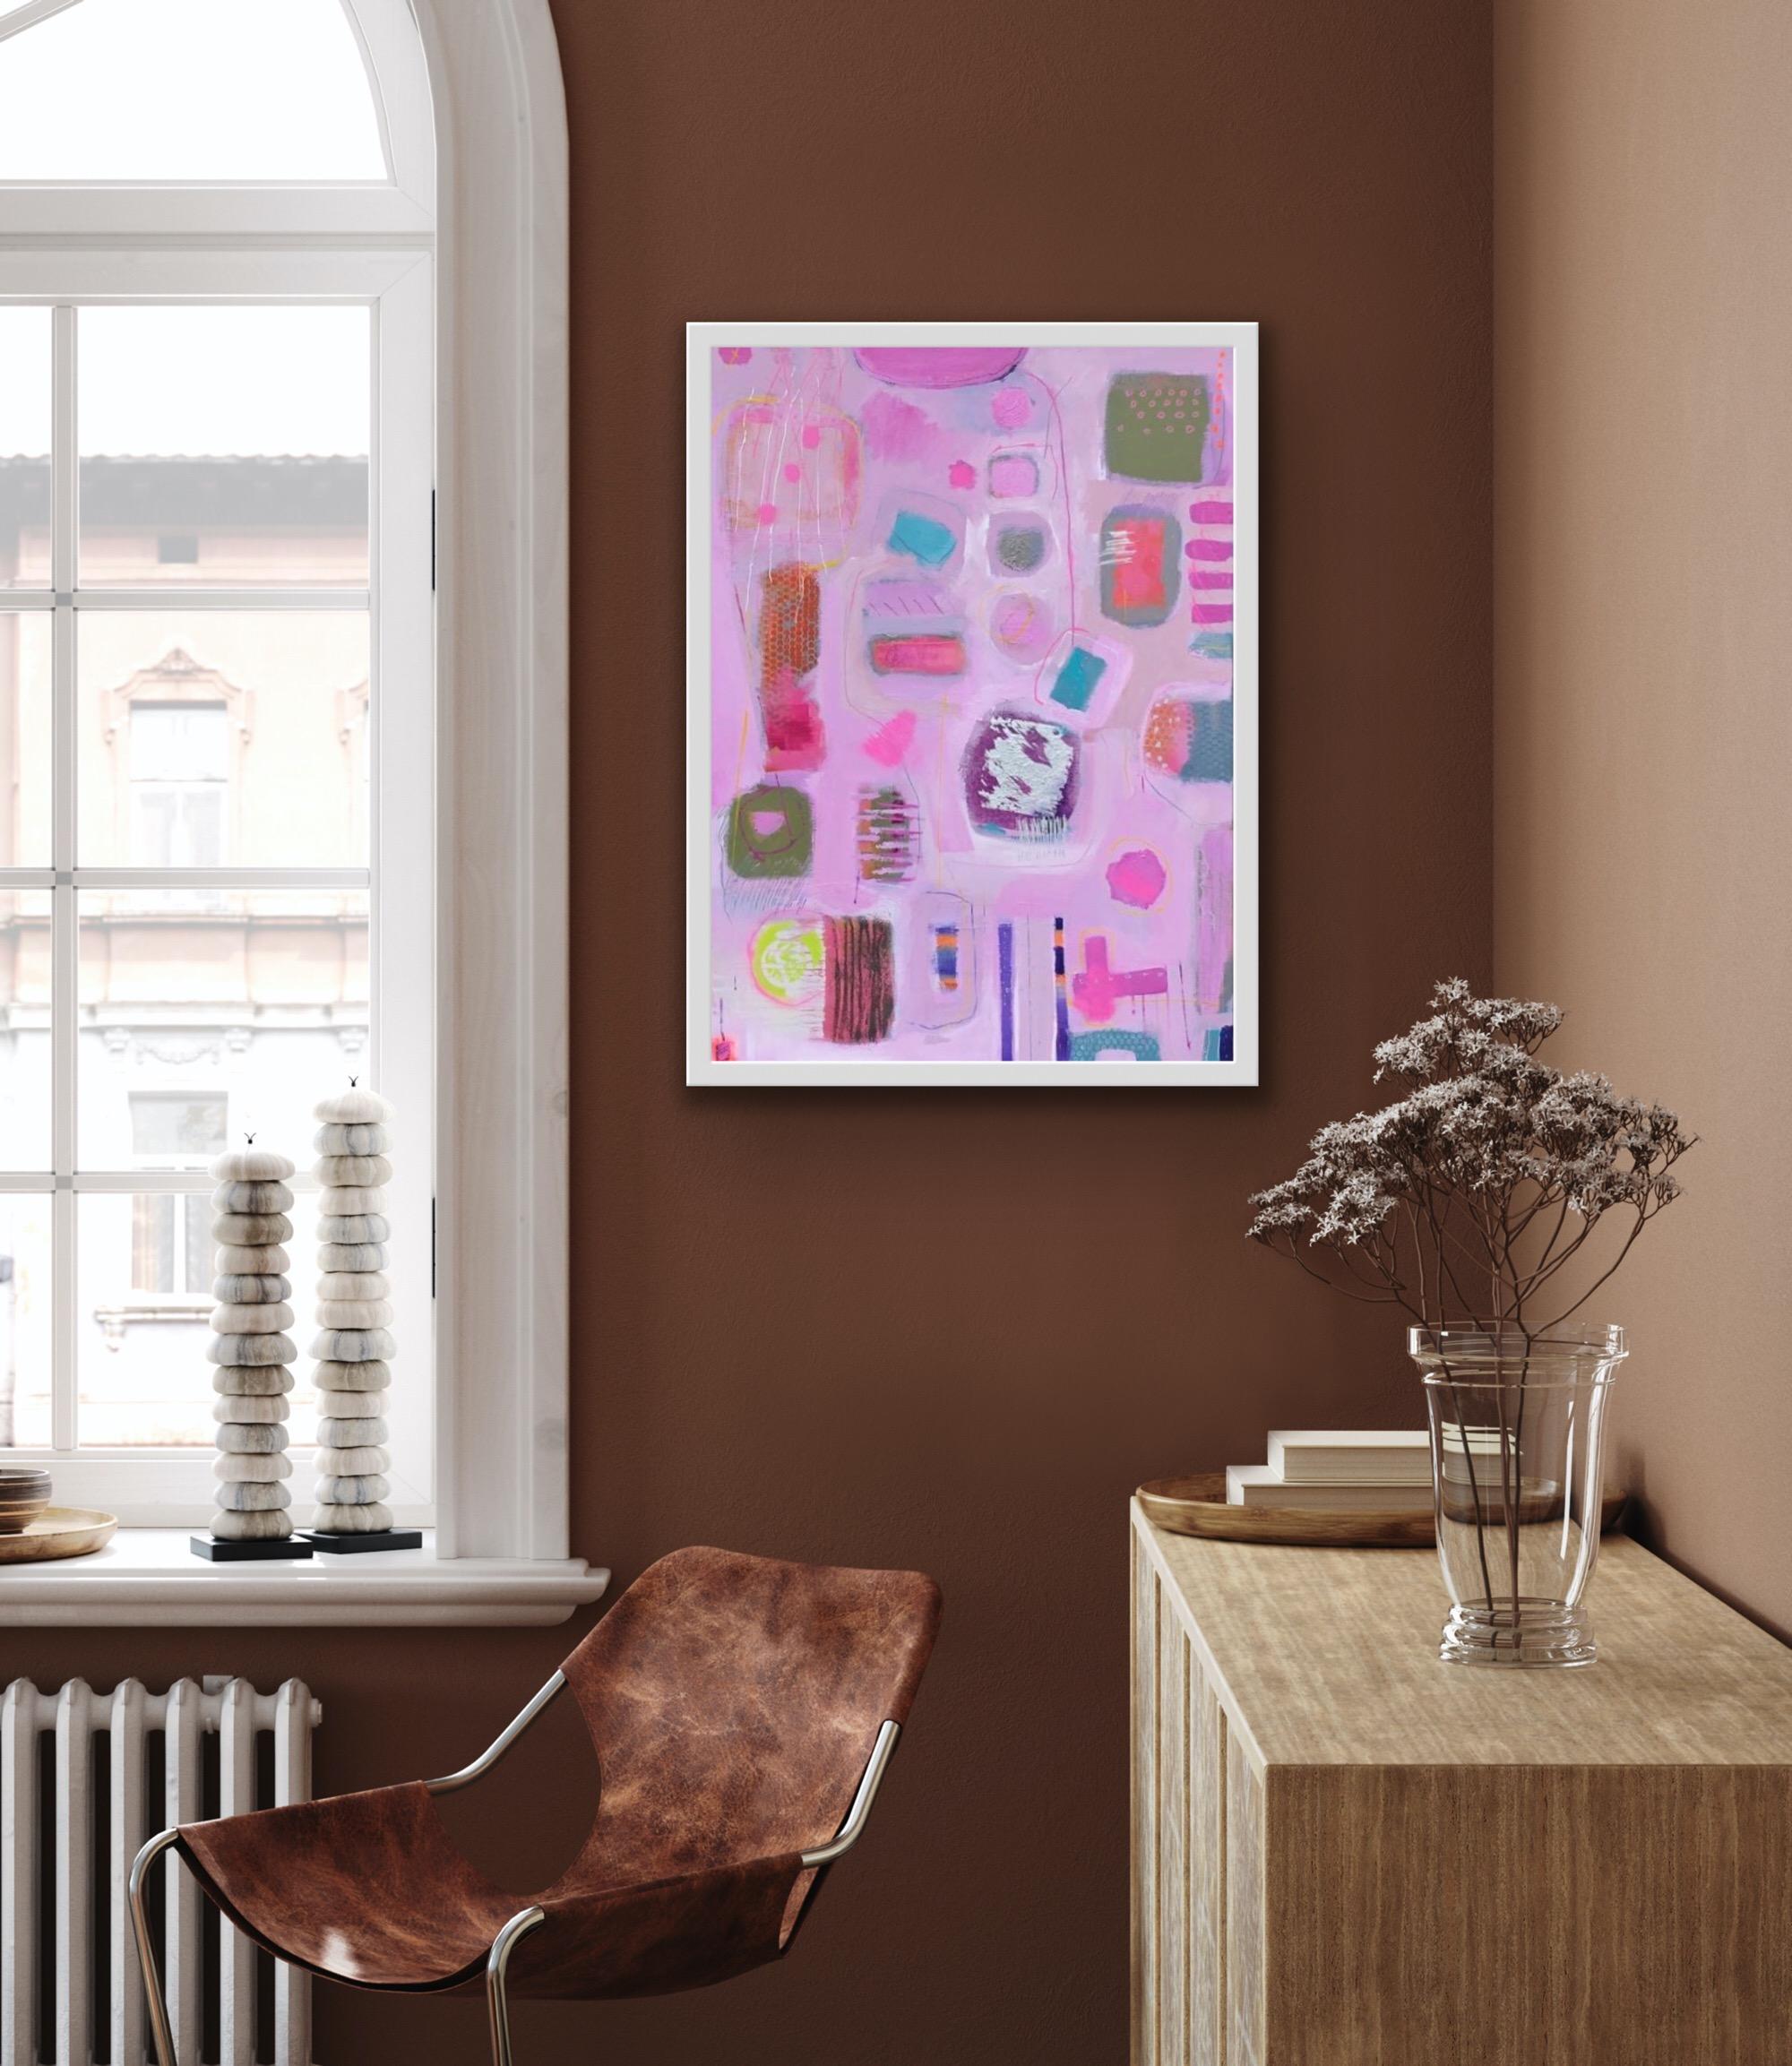 Maggie Laporte Banks. Pink Bikini [2022]

original
Acrylic on canvas, mixed medium
Image size: H:110 cm x W:80 cm
Complete Size of Unframed Work: H:110 cm x W:80 cm x D:2cm
Sold Unframed
Please note that insitu images are purely an indication of how